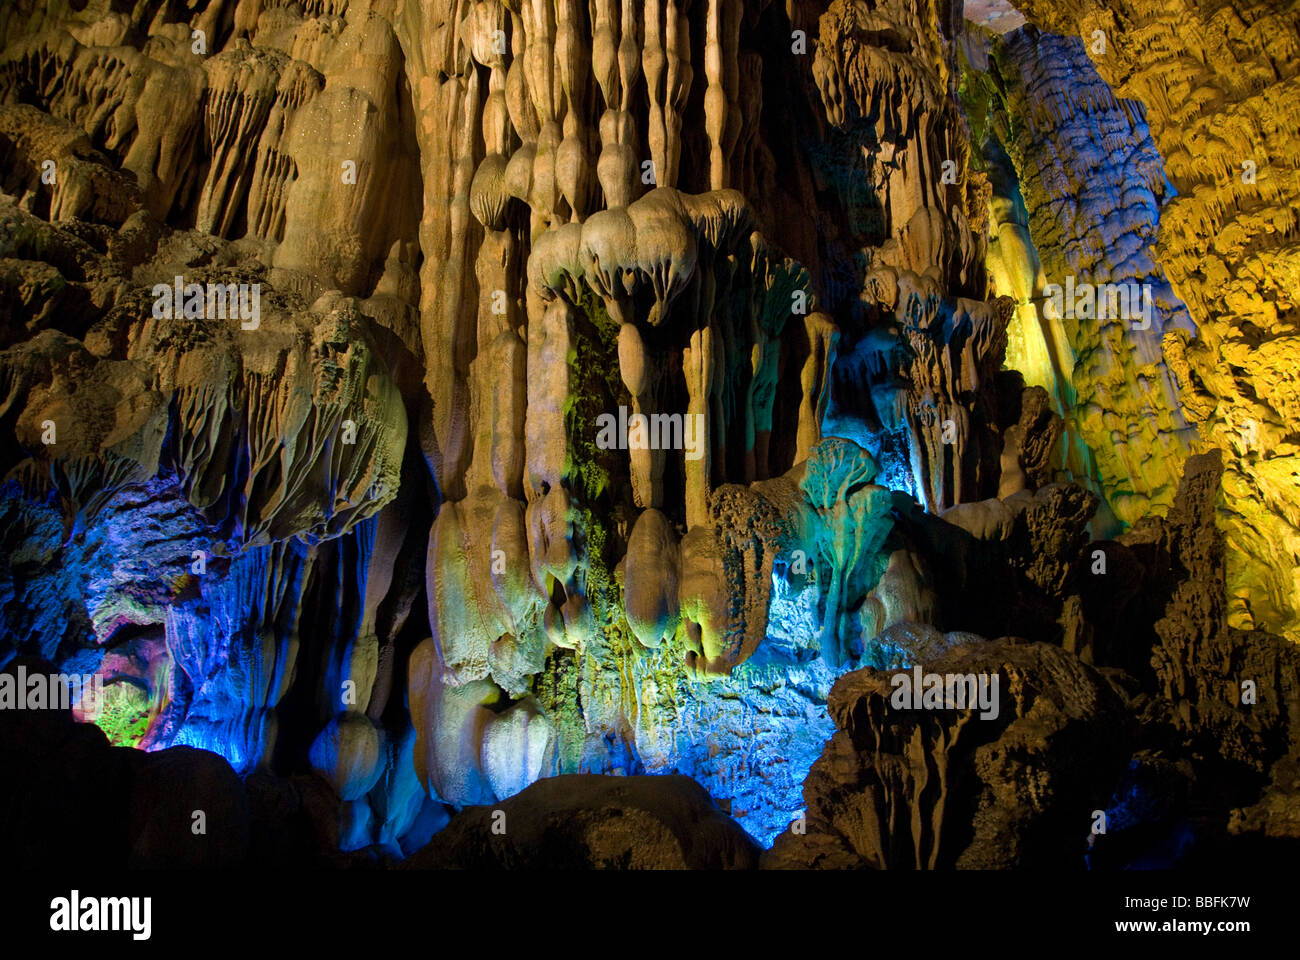 Limestone stalactites and stalagmites in abstract forms inside the reed flute cave, Guilin, China Stock Photo